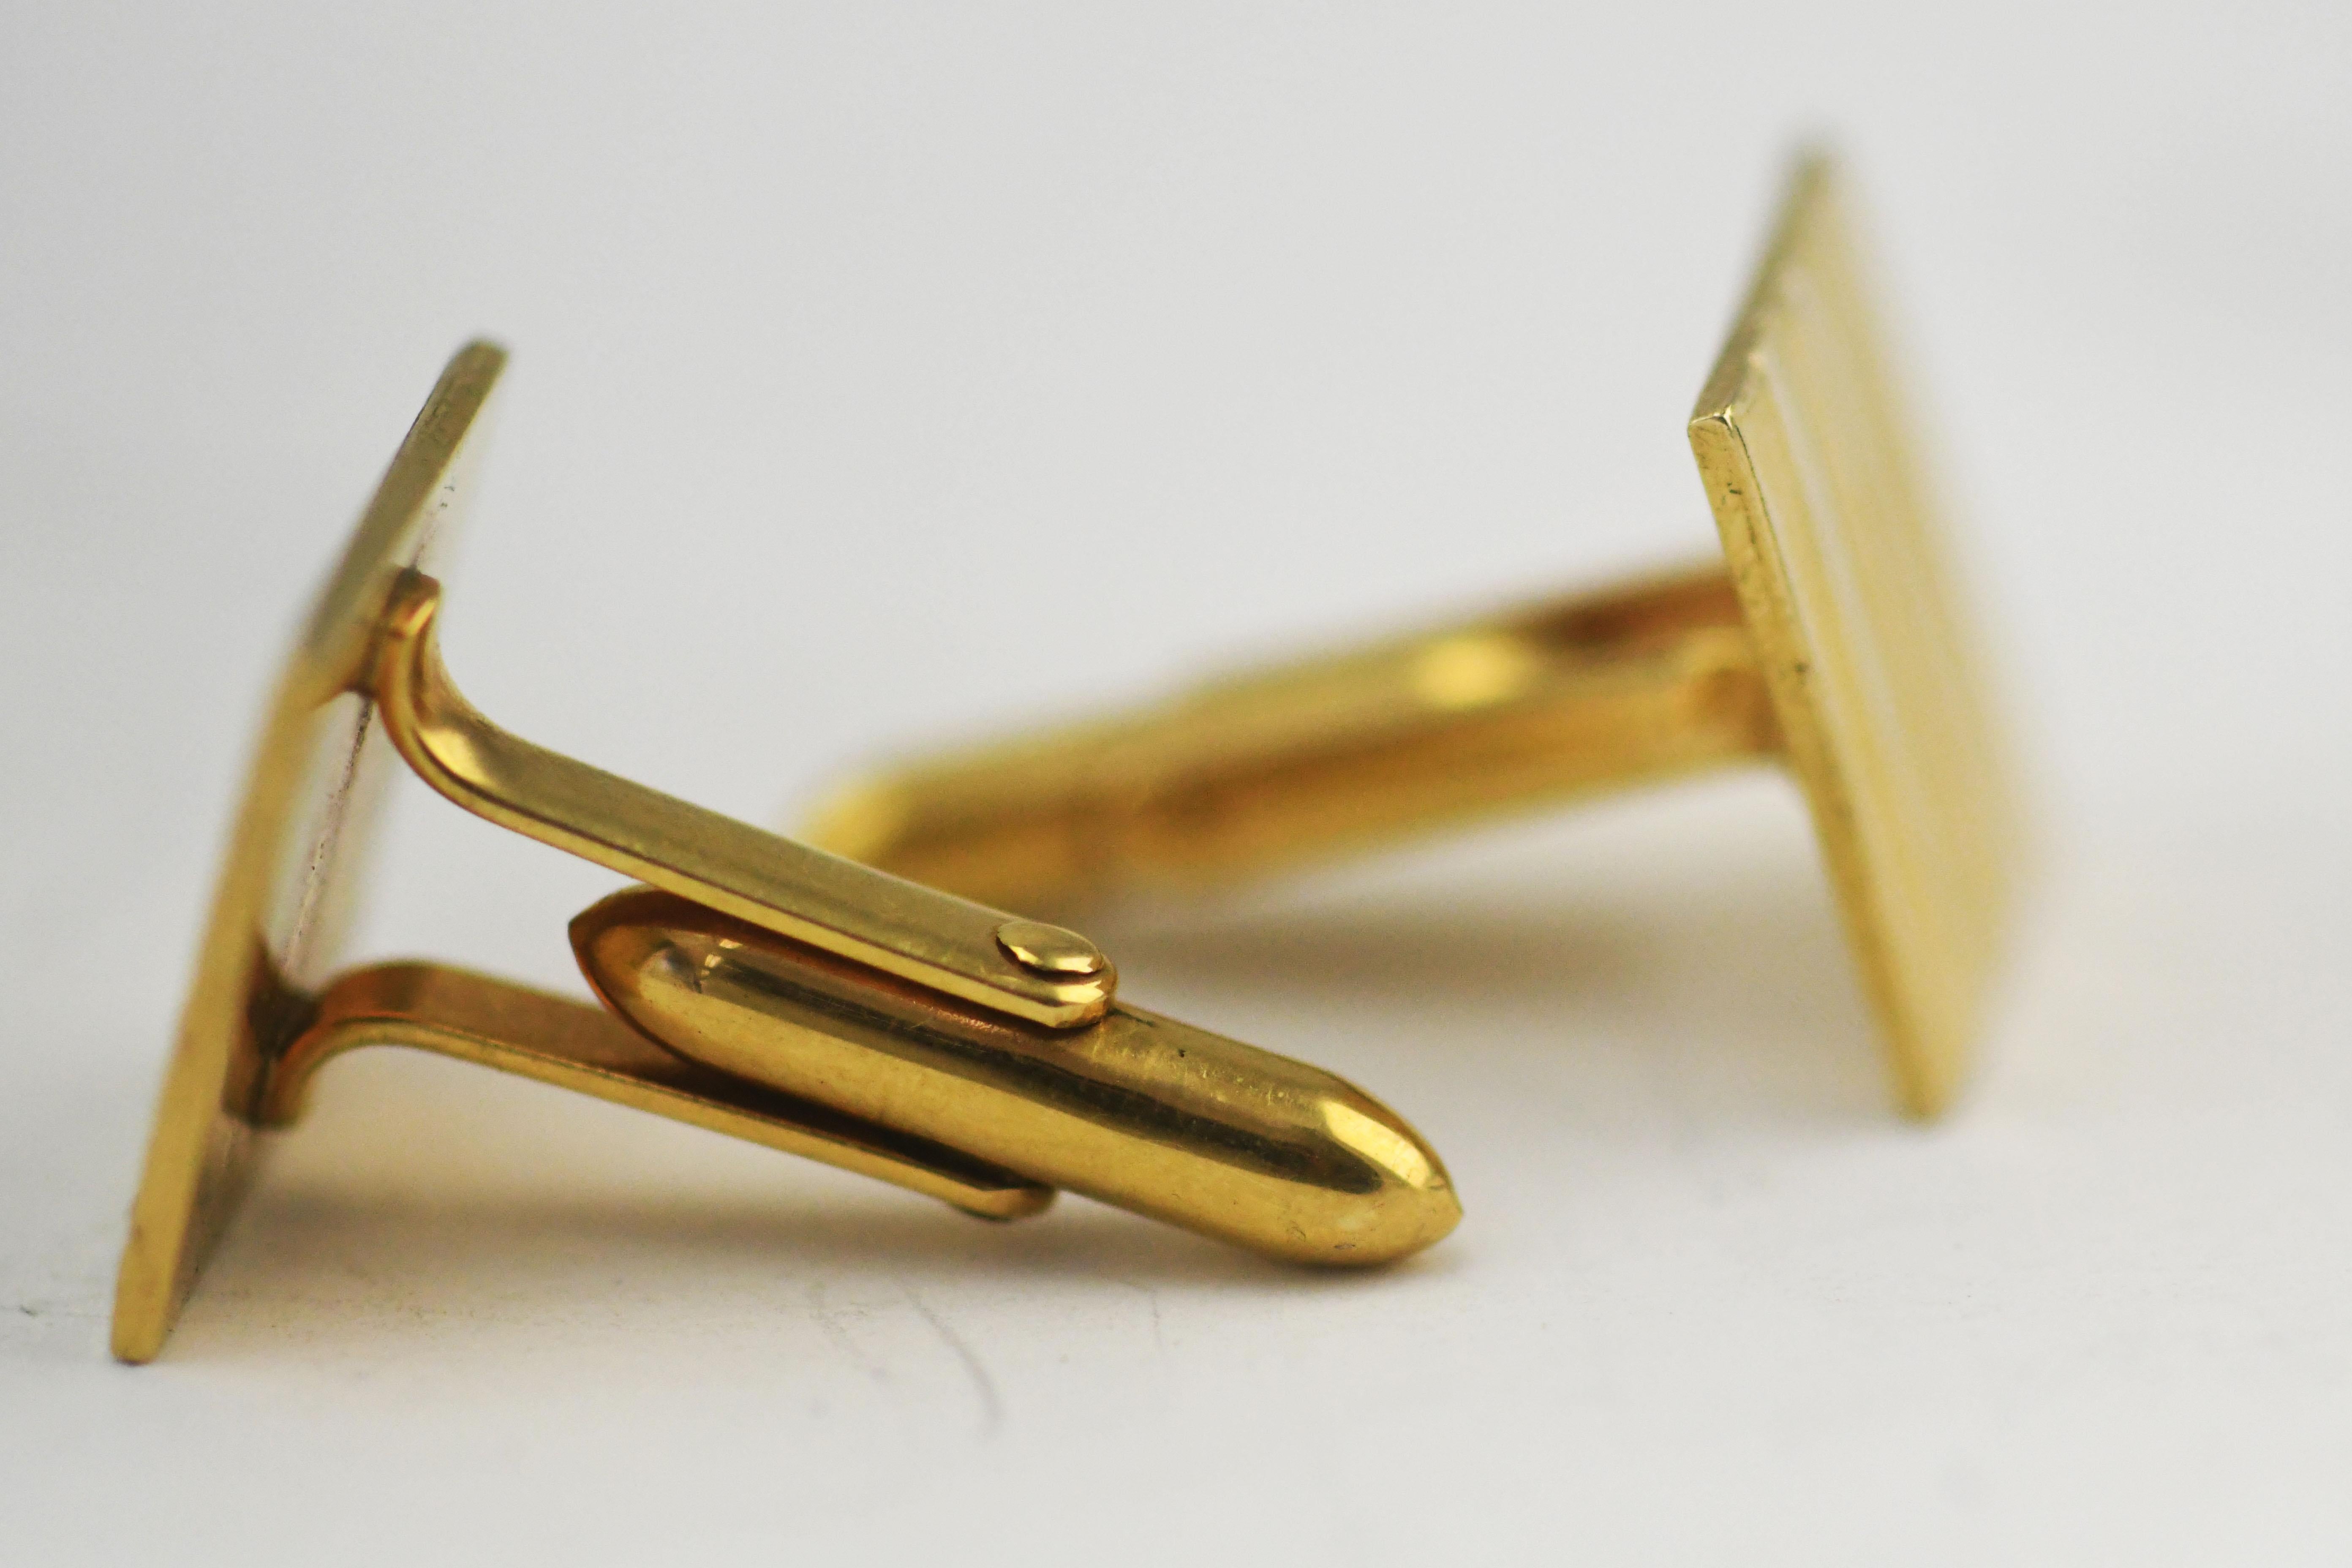  Correct D&B Dolan Bullock 14k Yellow Gold Pin Striped Style Square Cufflinks  10.6 grams They are 16mm x 16mm pieces and 25mm from front to end of the toggle bar on the back.  Beautiful pieces are well built.  